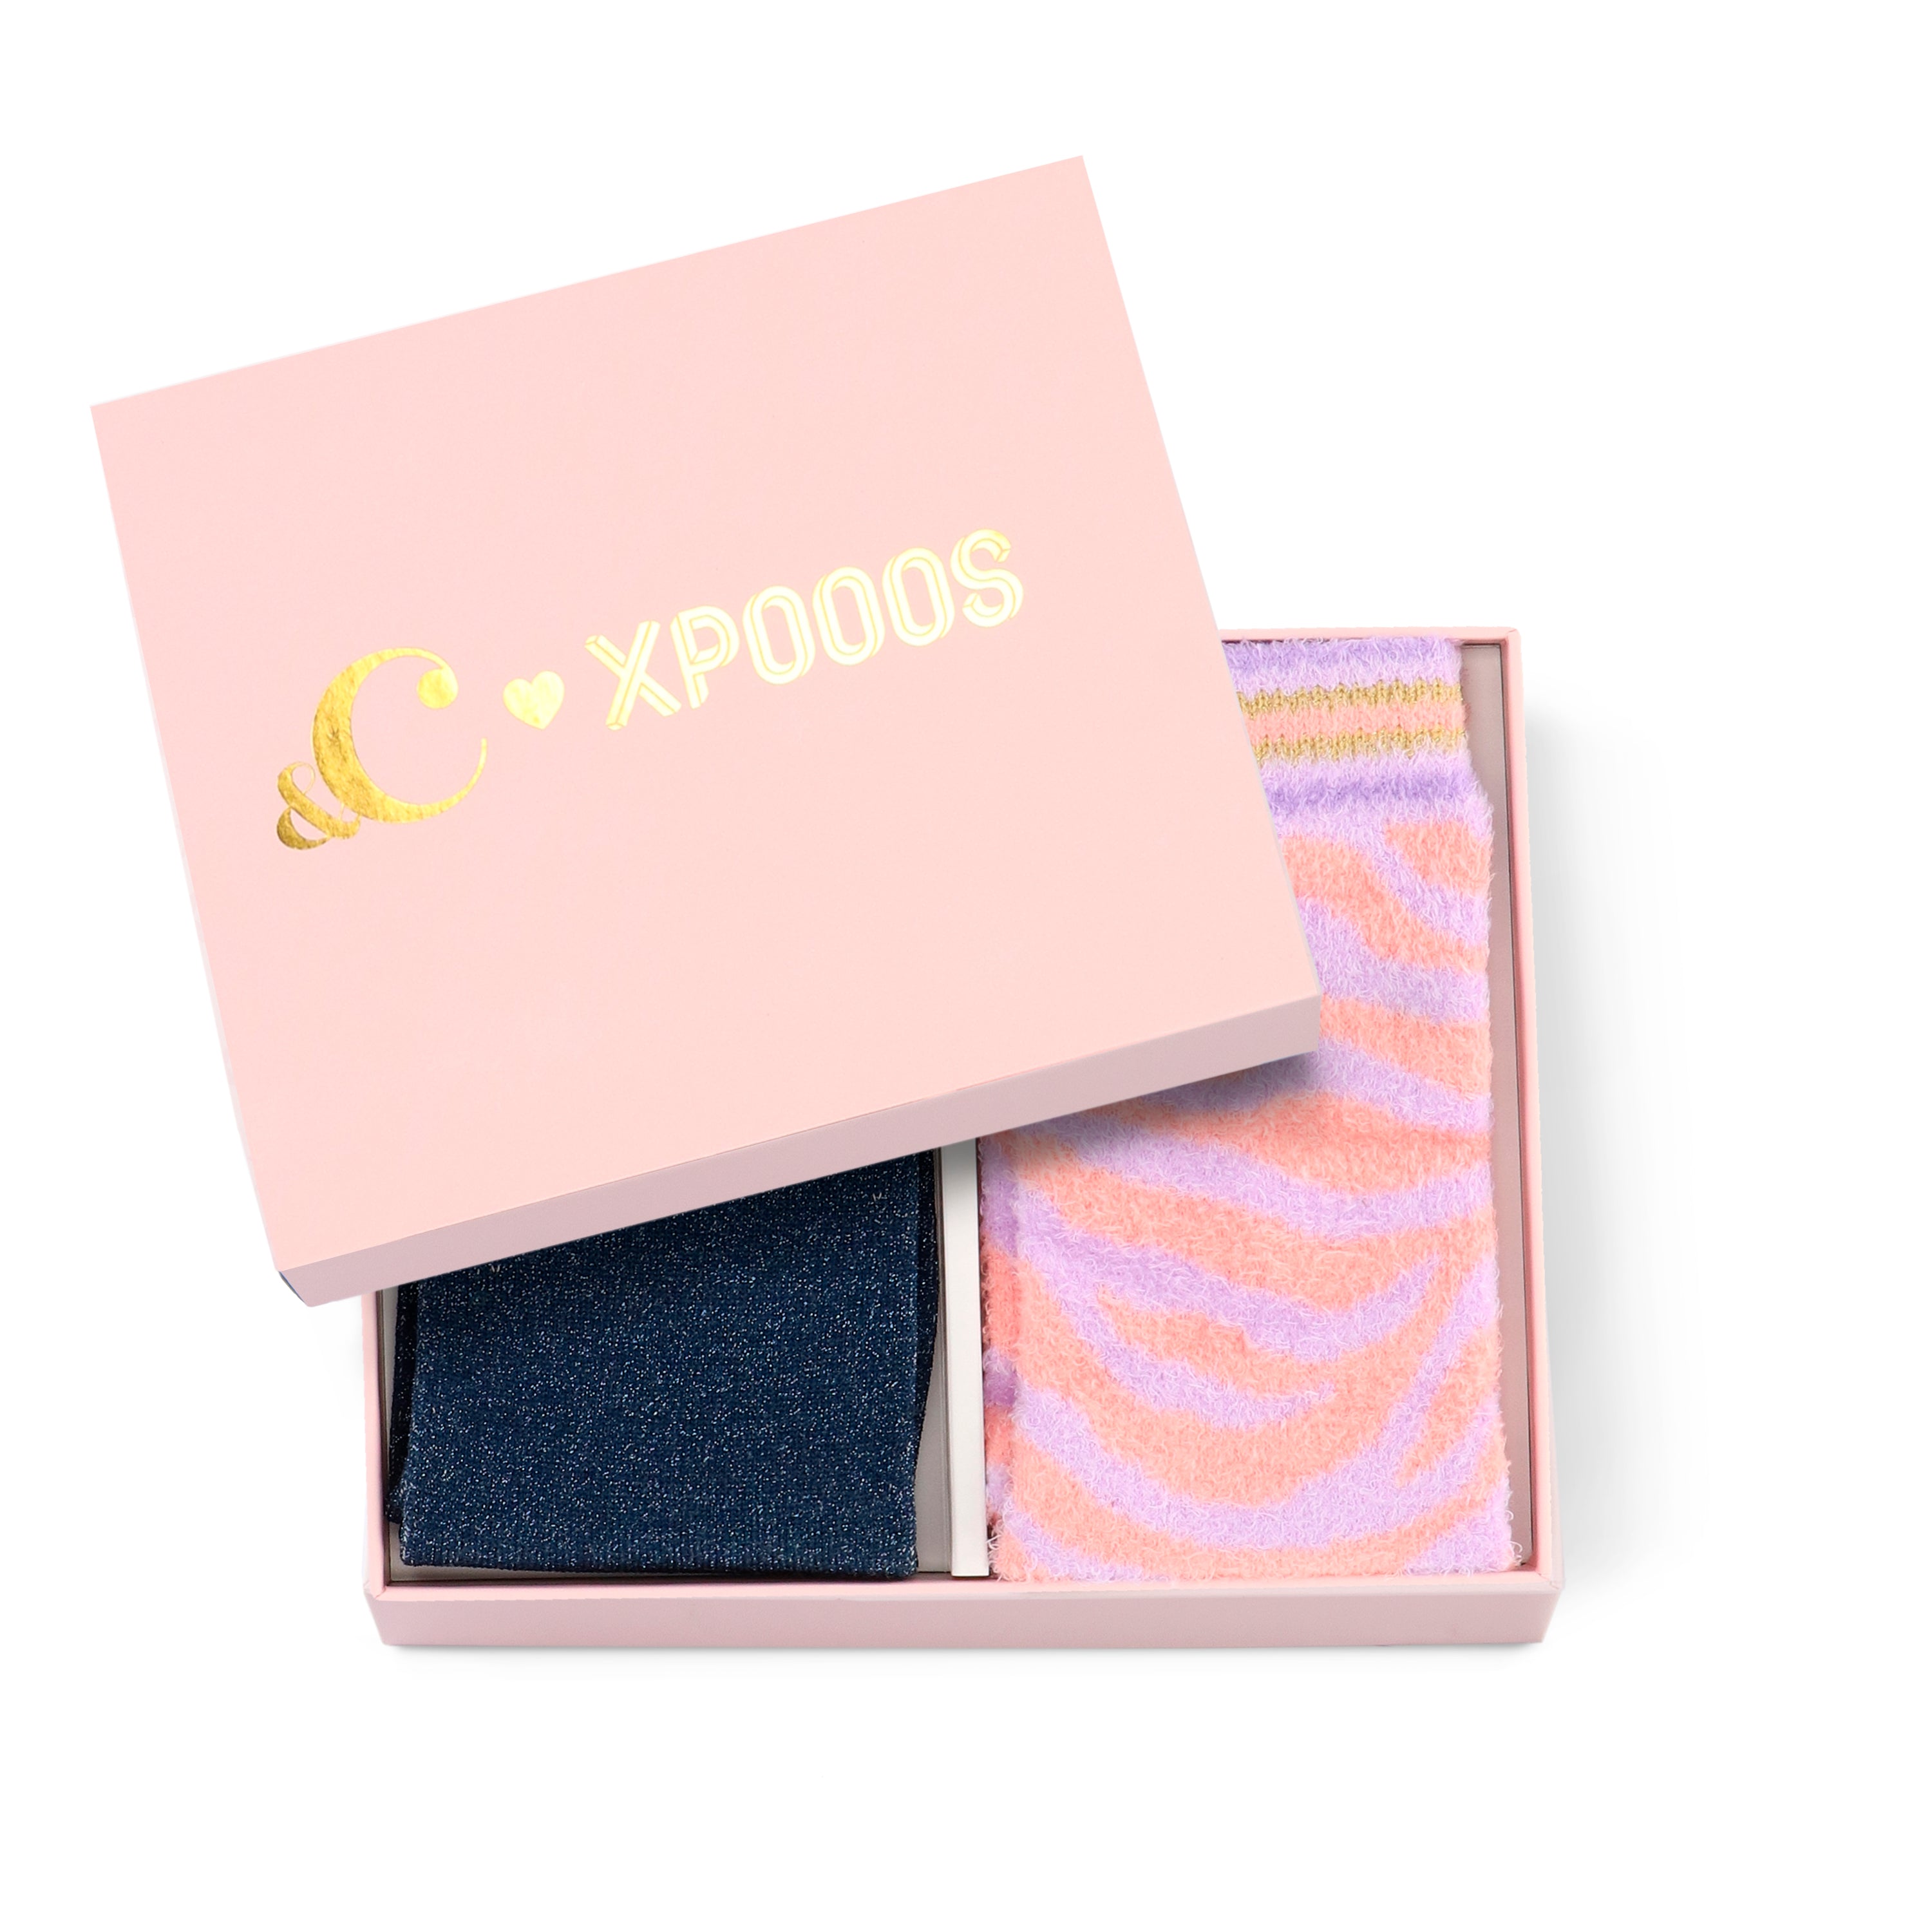 &C × XPOOOS Giftbox: Glitter & Panther